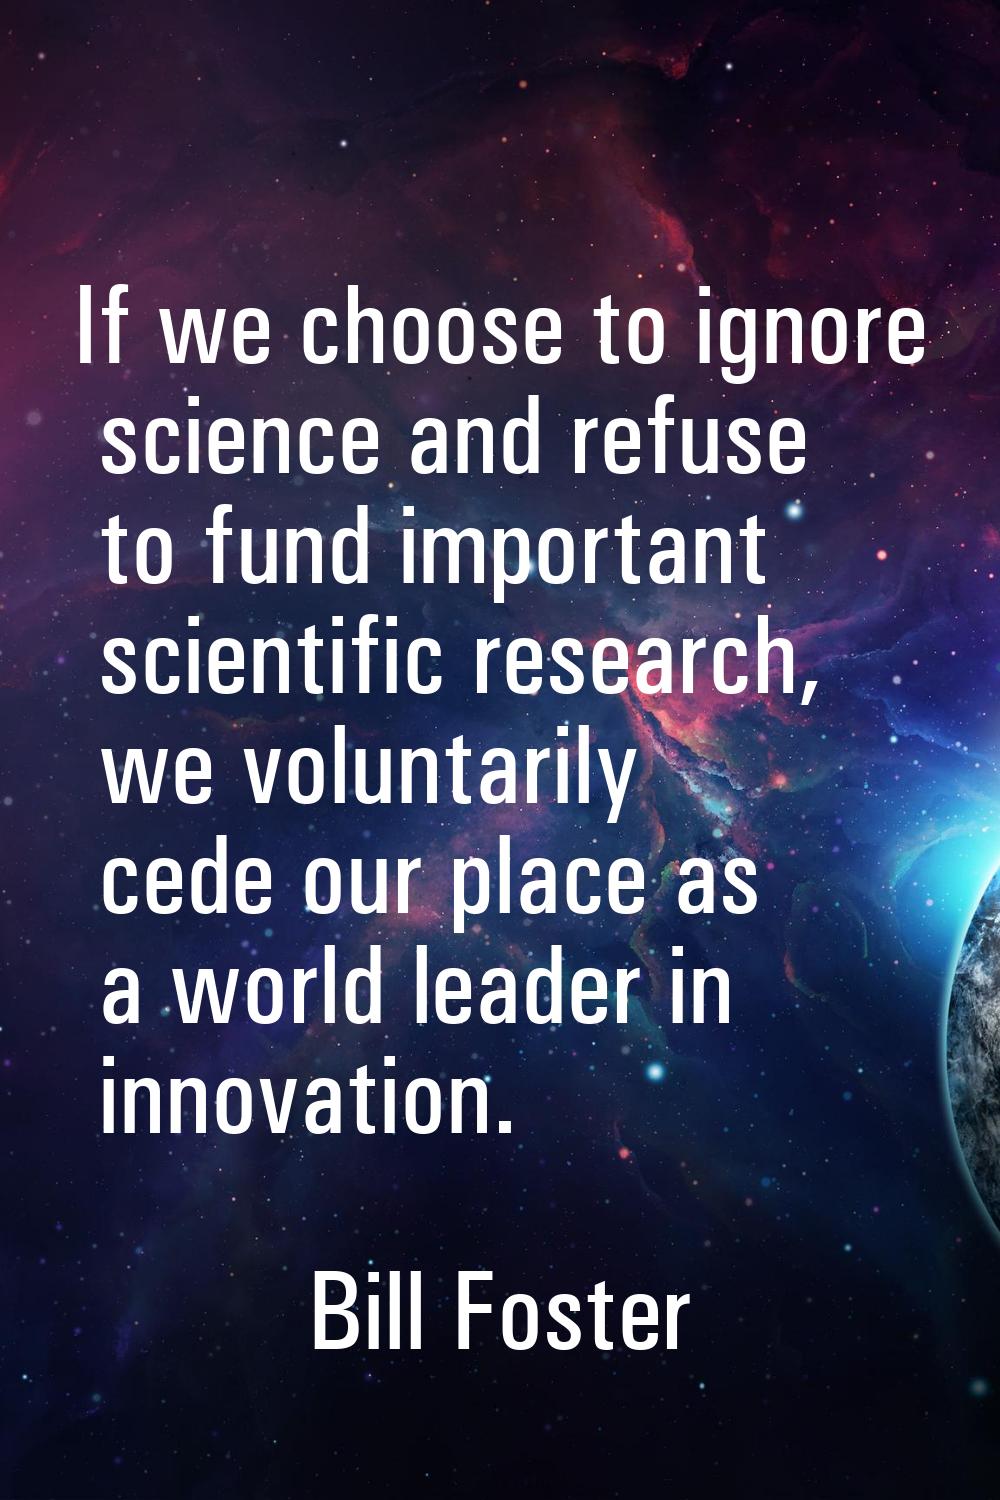 If we choose to ignore science and refuse to fund important scientific research, we voluntarily ced